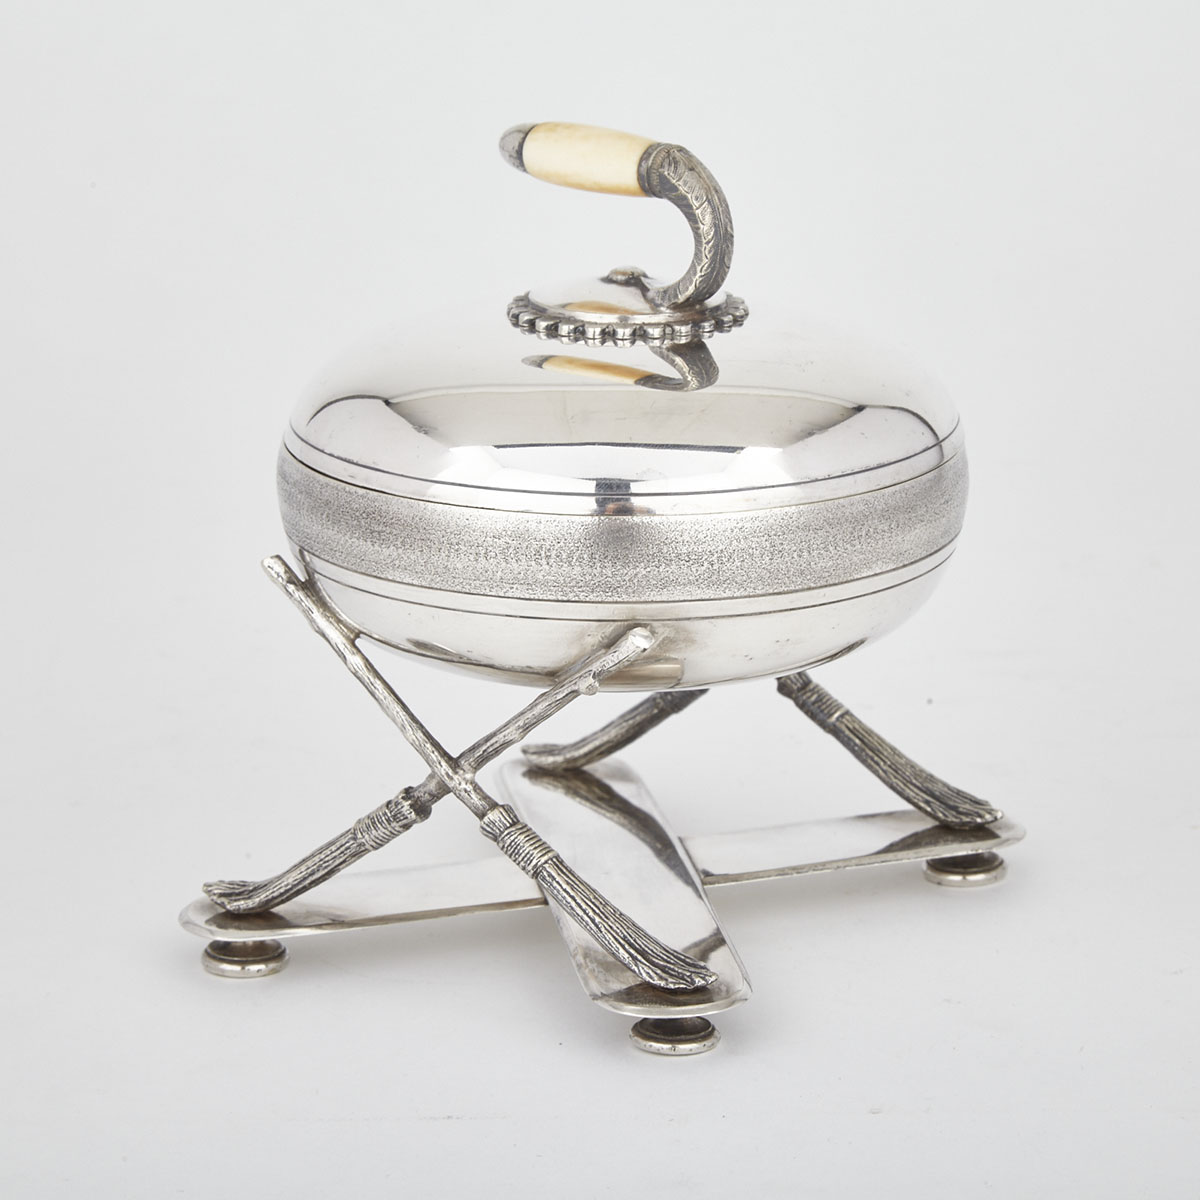 Unusual Victorian Silver Plated ‘Curling’ Dish and Cover, Fenton Bros., late 19th century